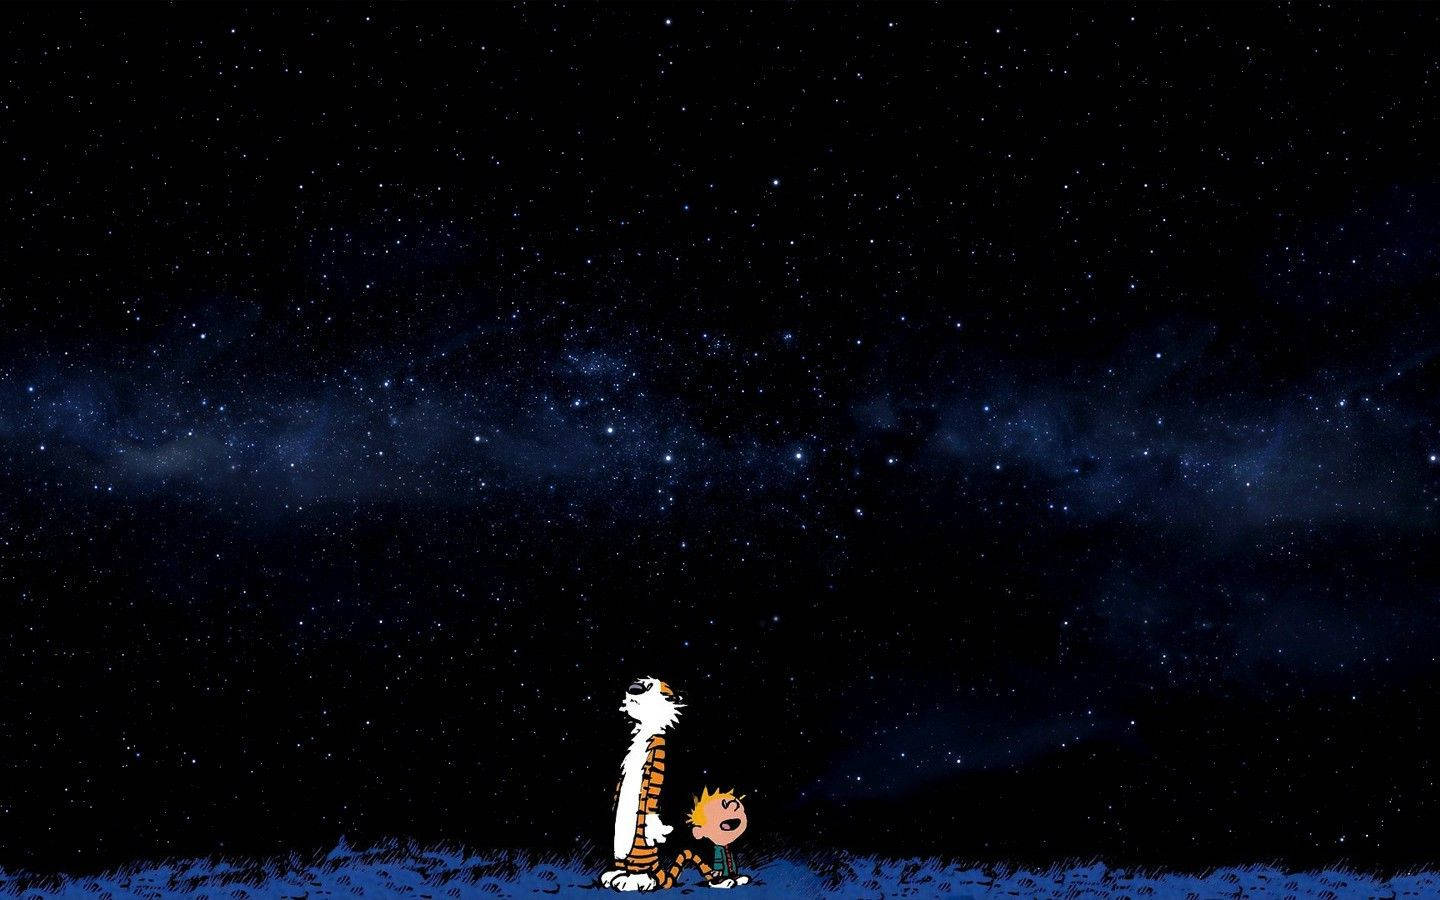 calvin and hobbes black and white wallpaper